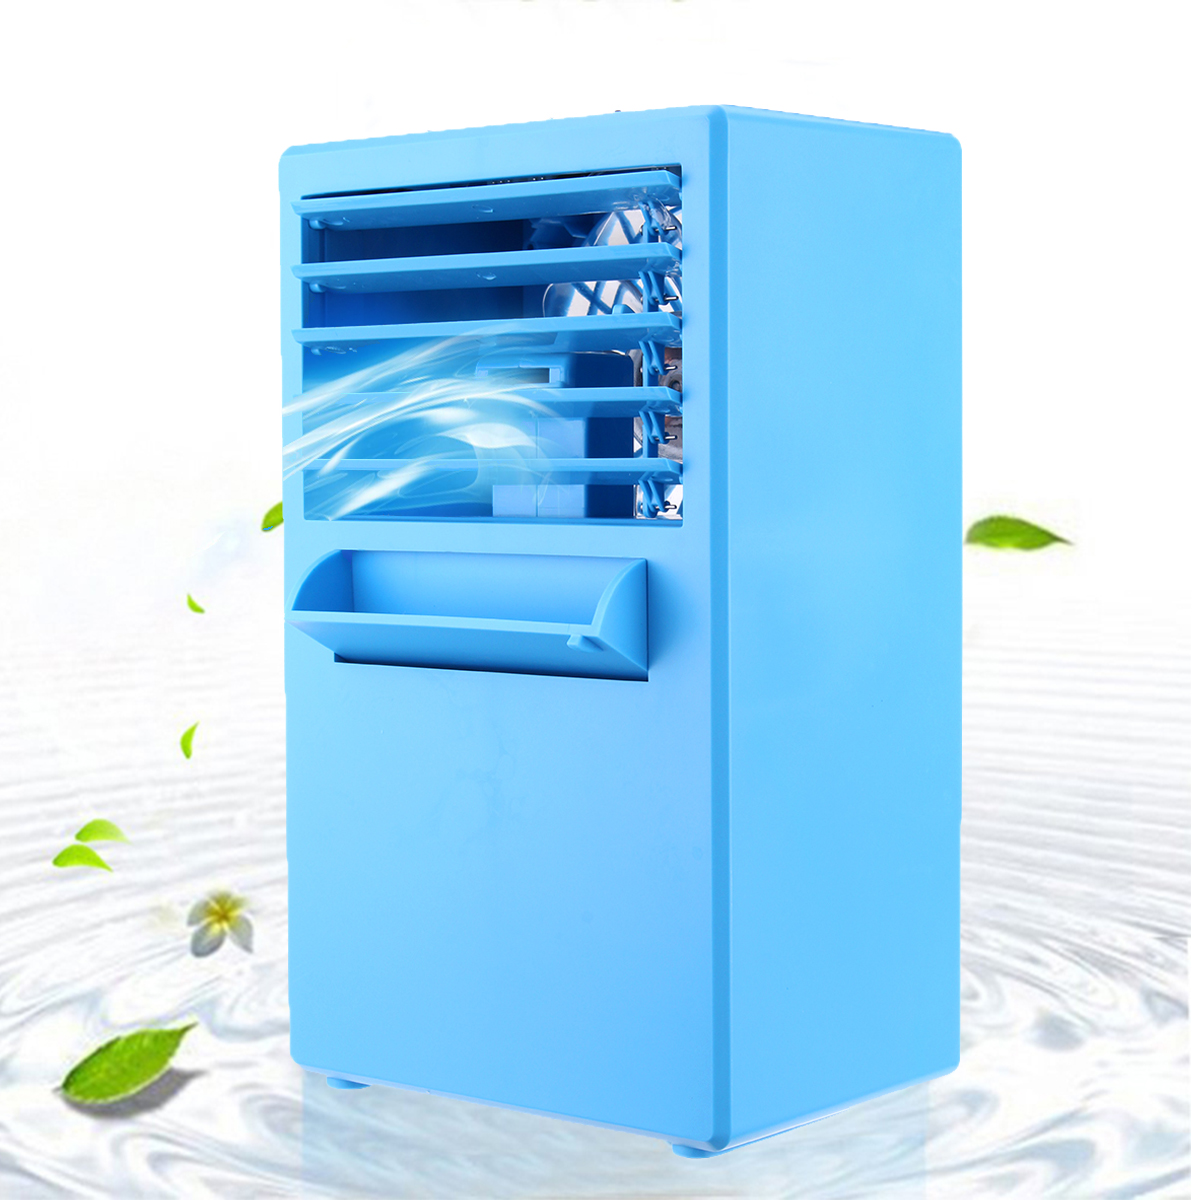 24W-24V-Portable-Air-Conditioning-Fan-Low-Noise-3-Wind-Speeds-Cooler-Digitals-Cooling-System-Timing--1710103-9